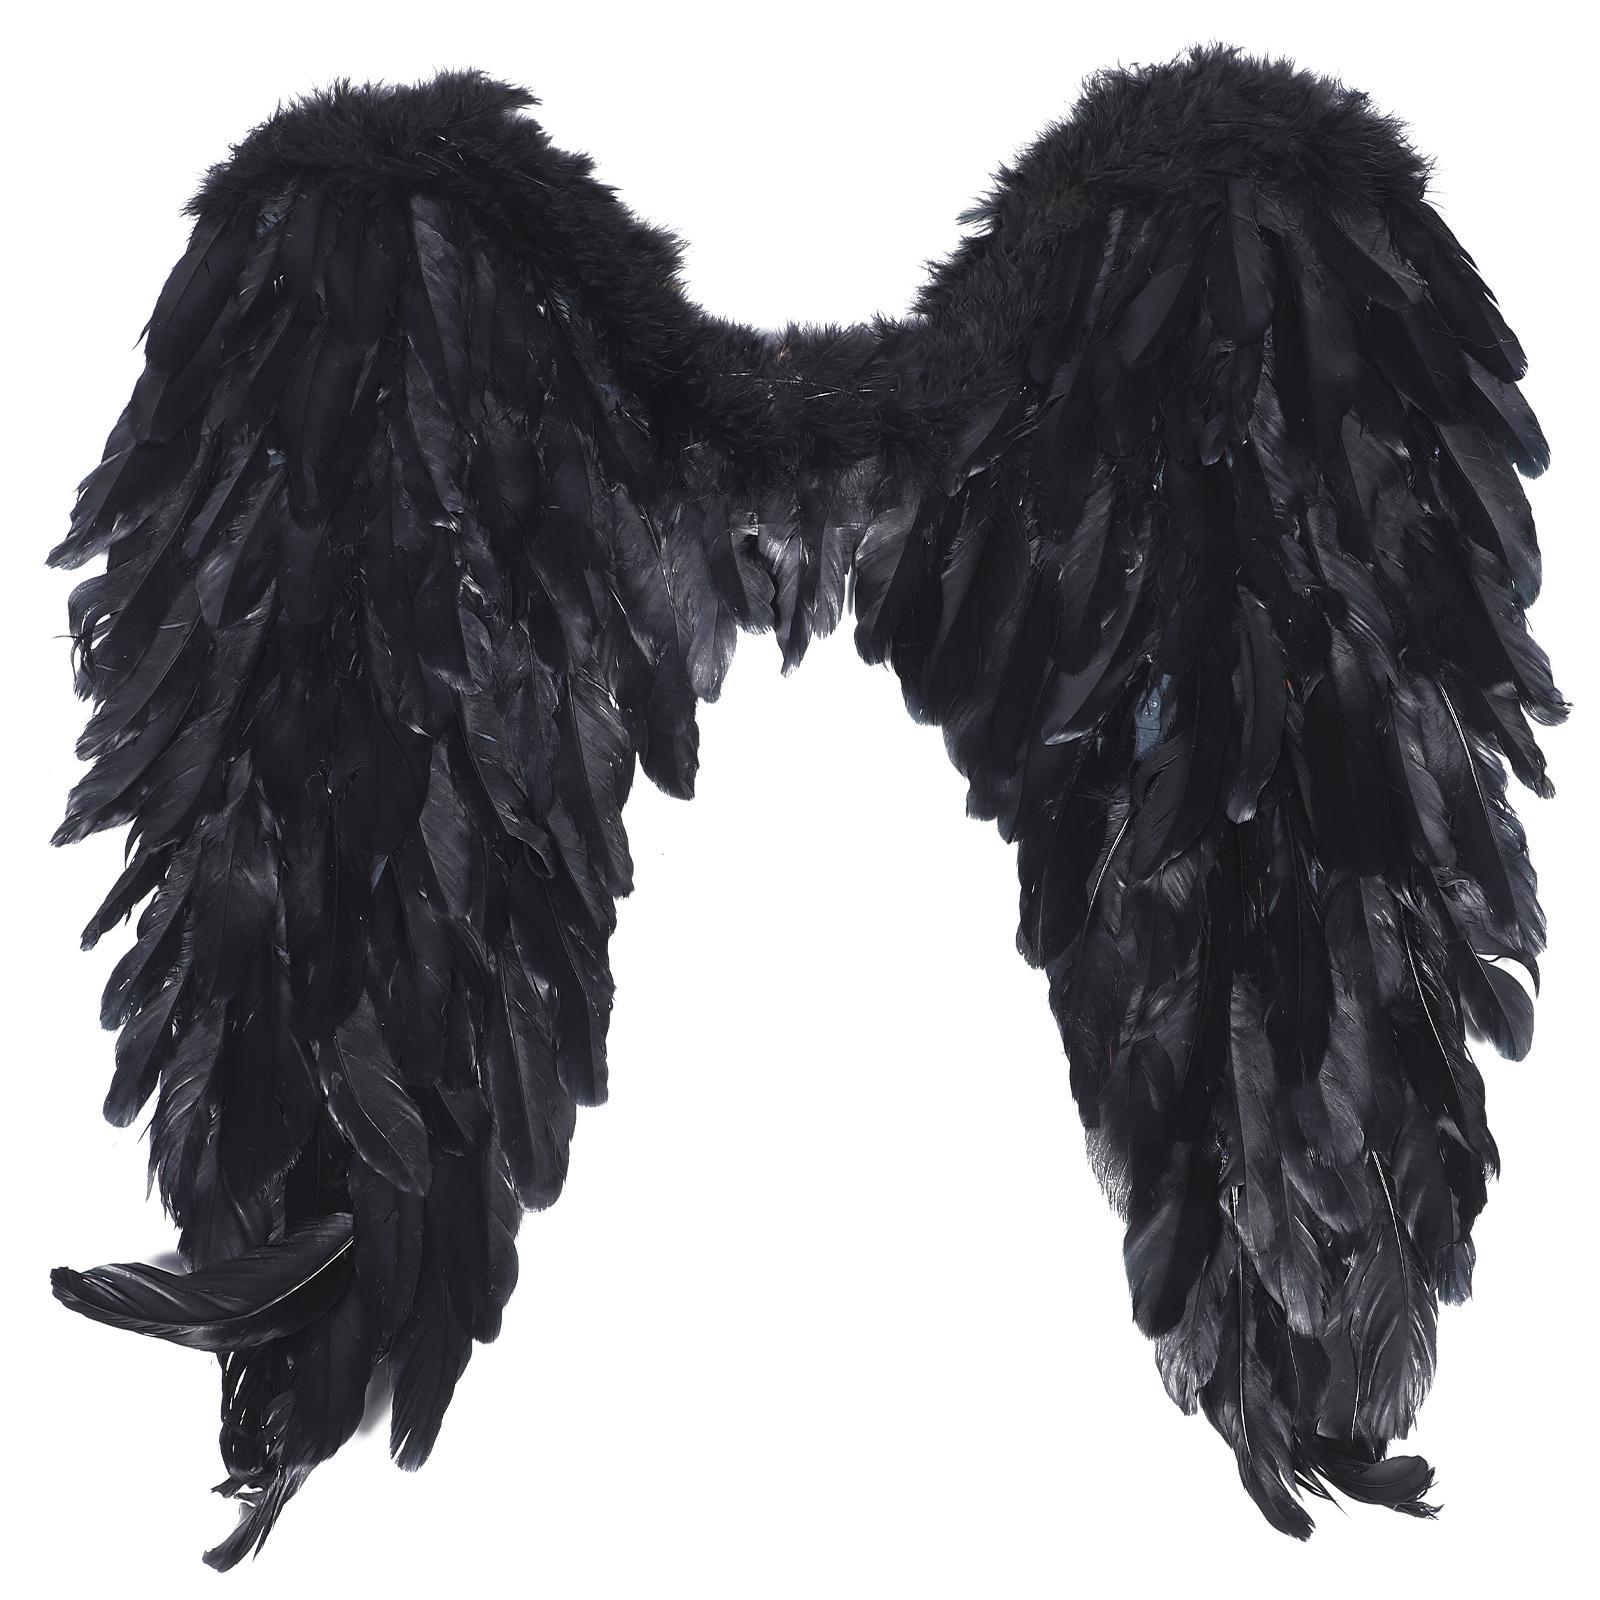 3 Pc Black Wing Adult Fairy Wings Costume Performance Angel Child